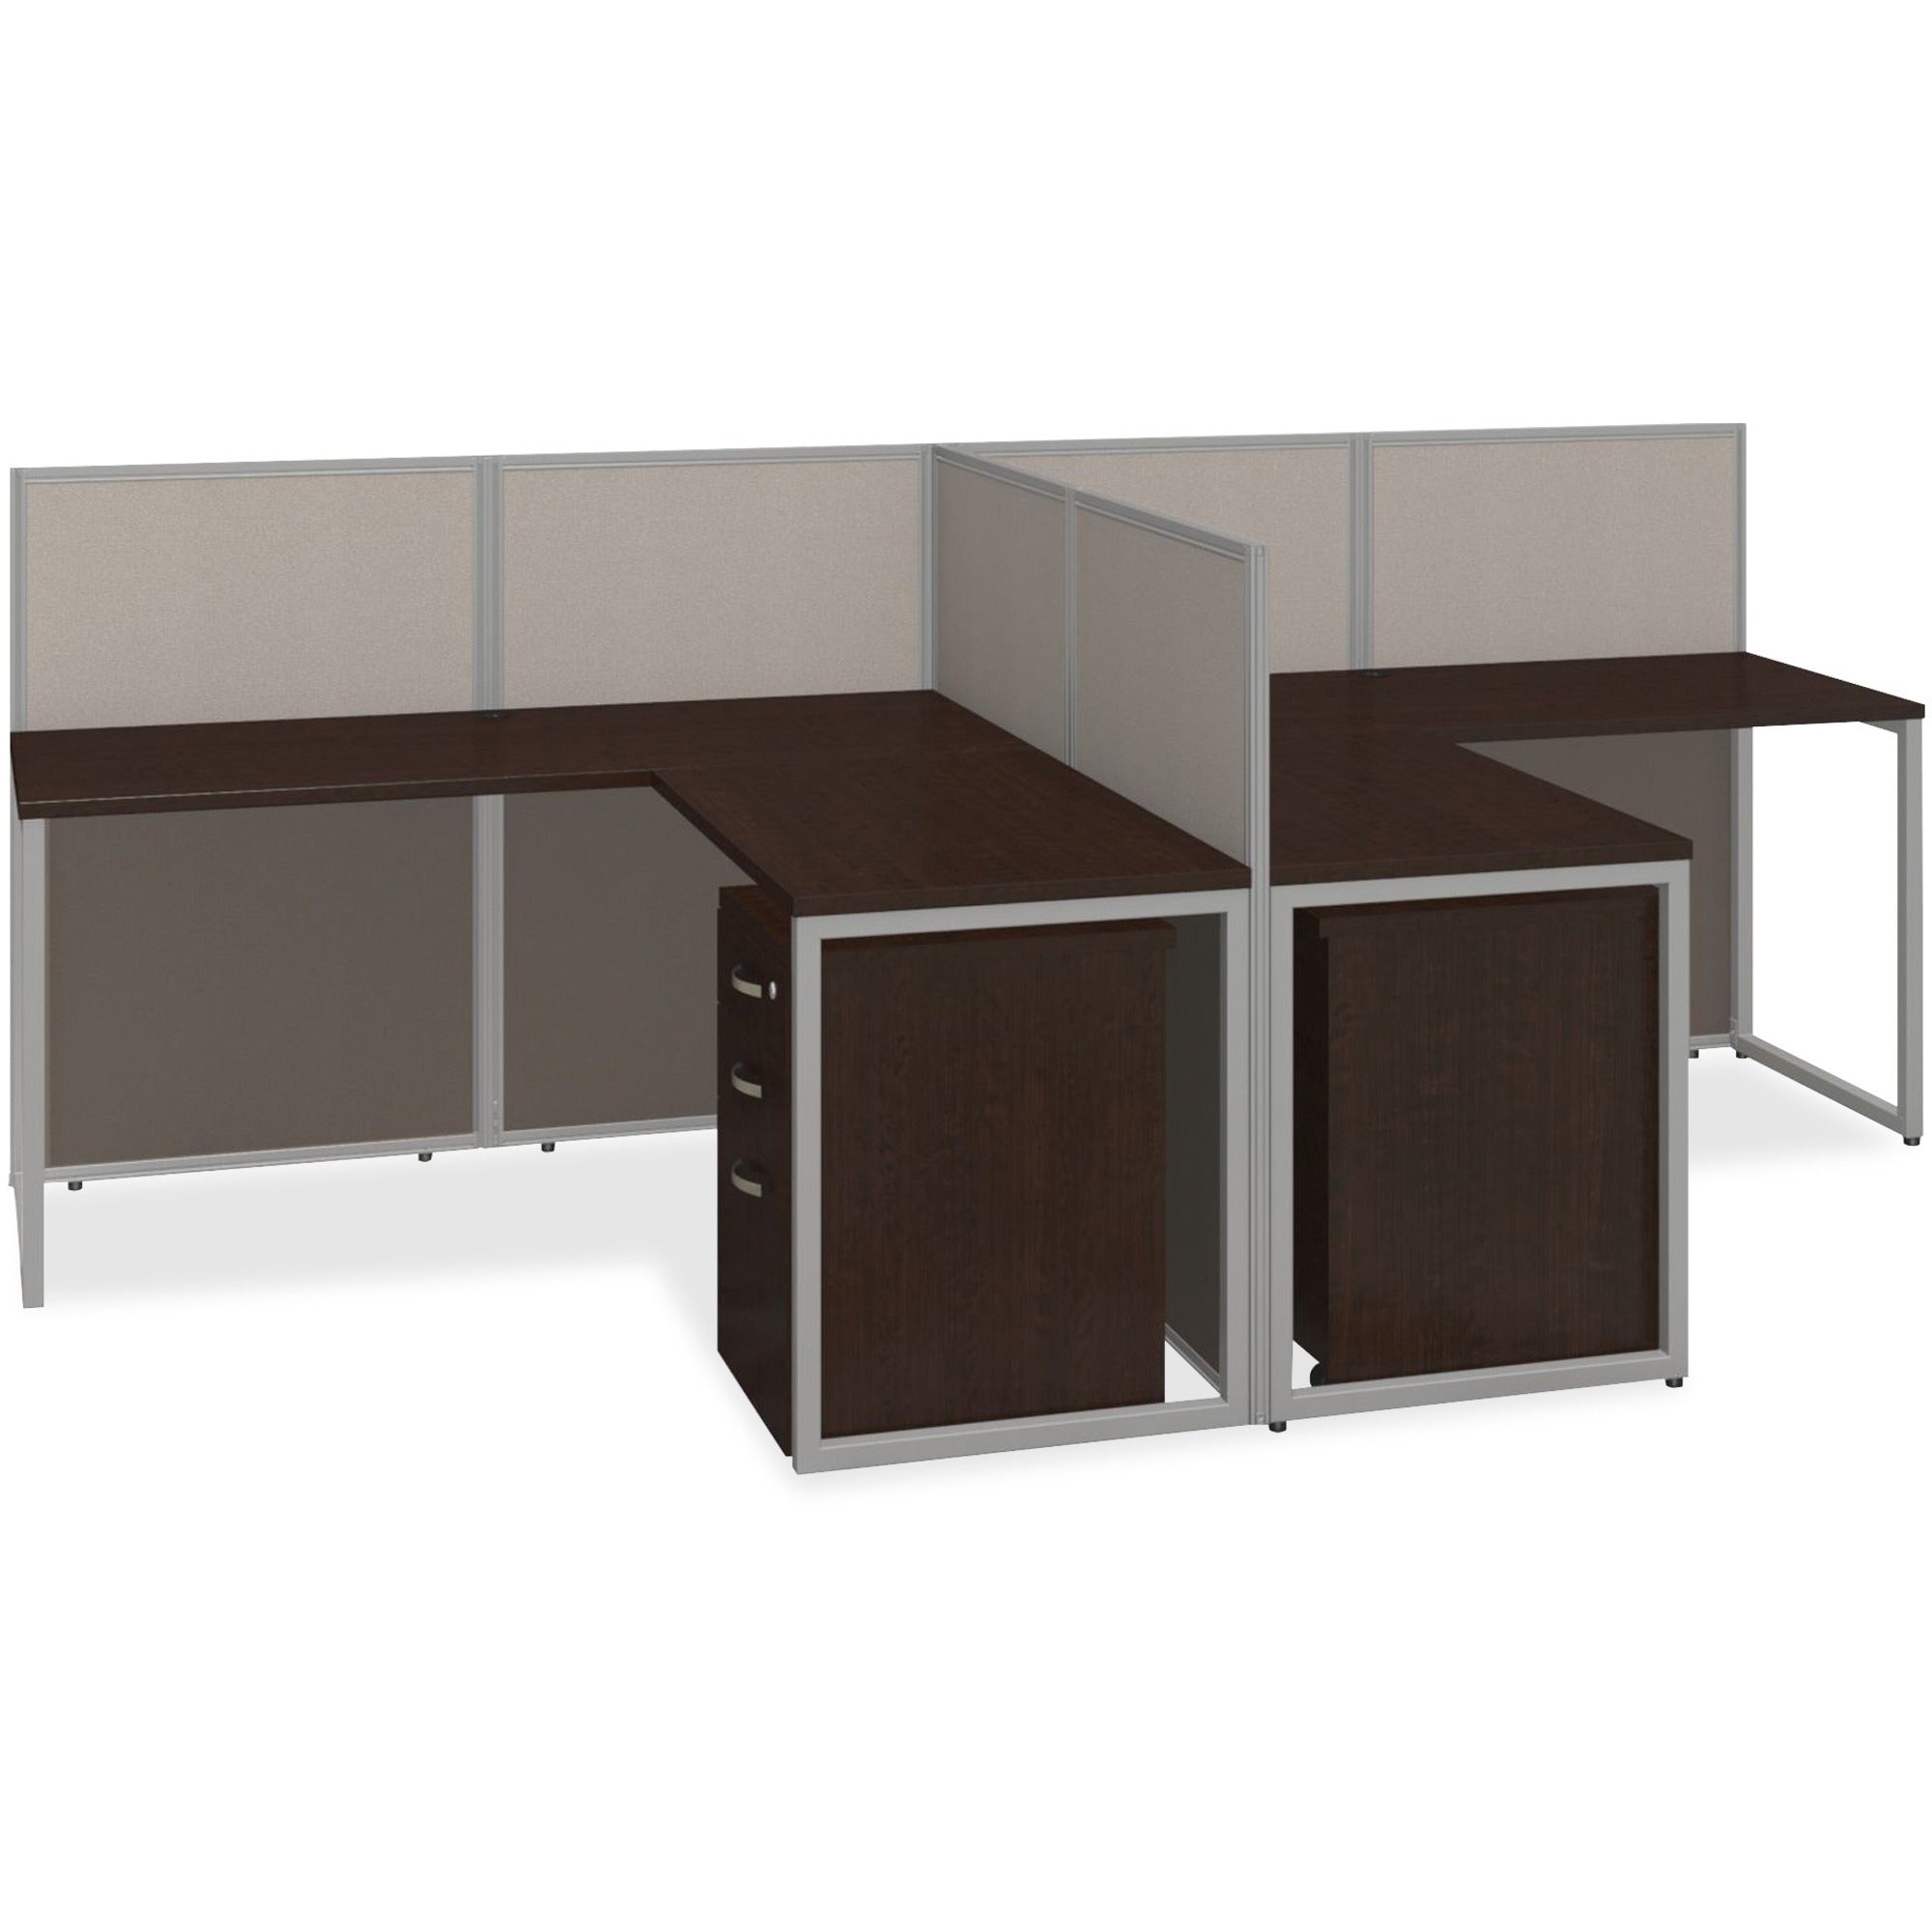 Bush Business Furniture Easy Office: 60W 2 Person L Desk Open Office with 3 Drawer Mobile Pedestals - Mocha Cherry - 1